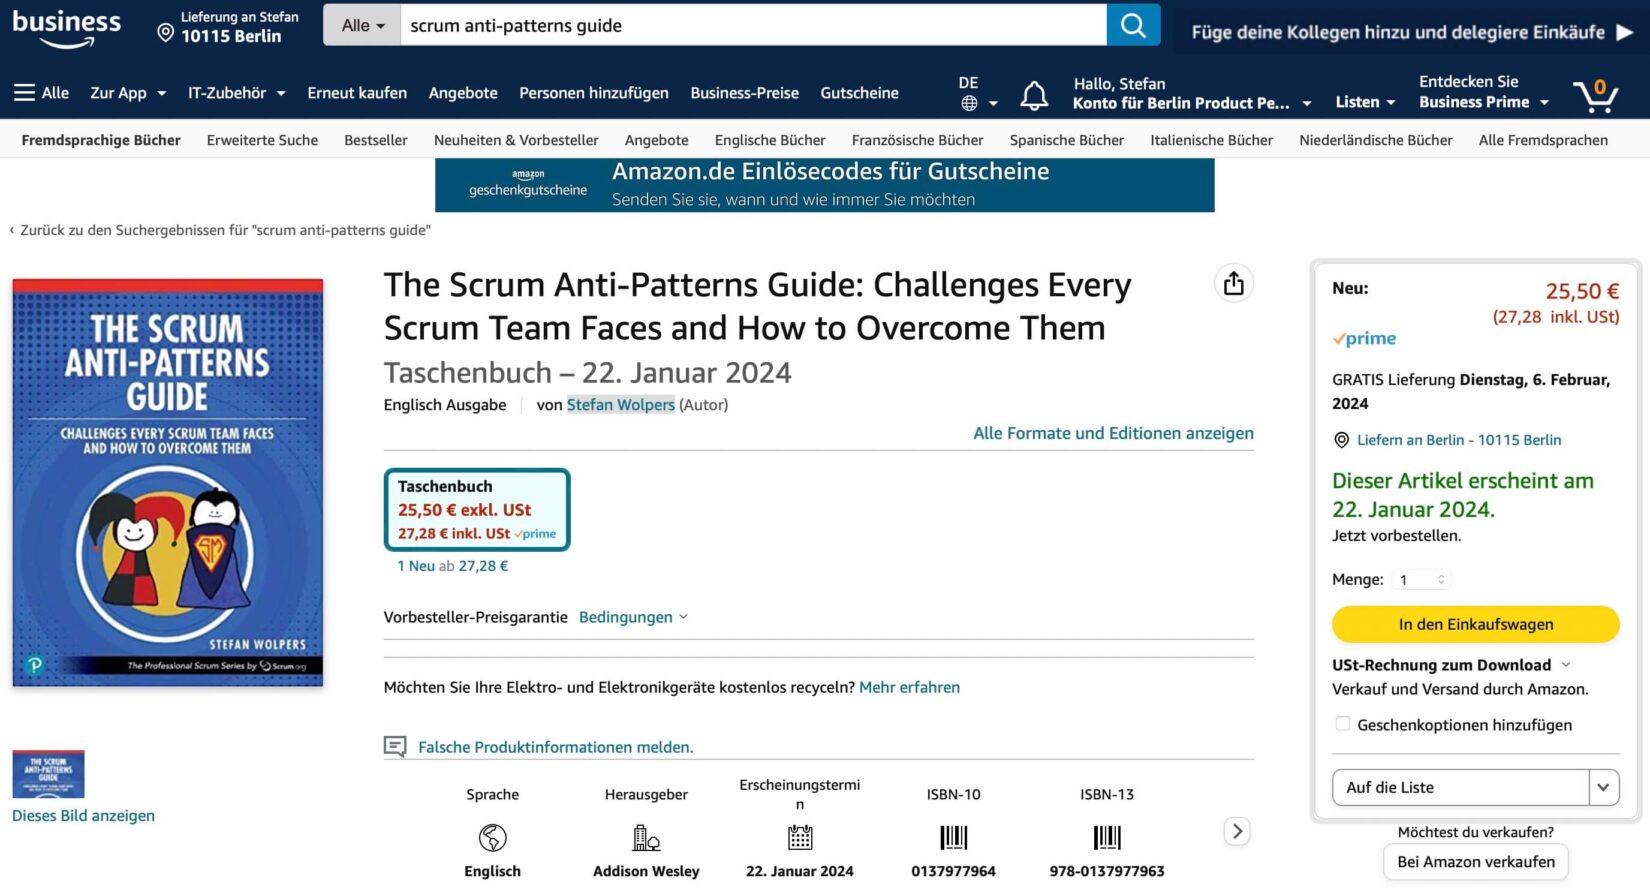 Preorder the Scrum Anti-Patterns Guide on Amazon.de